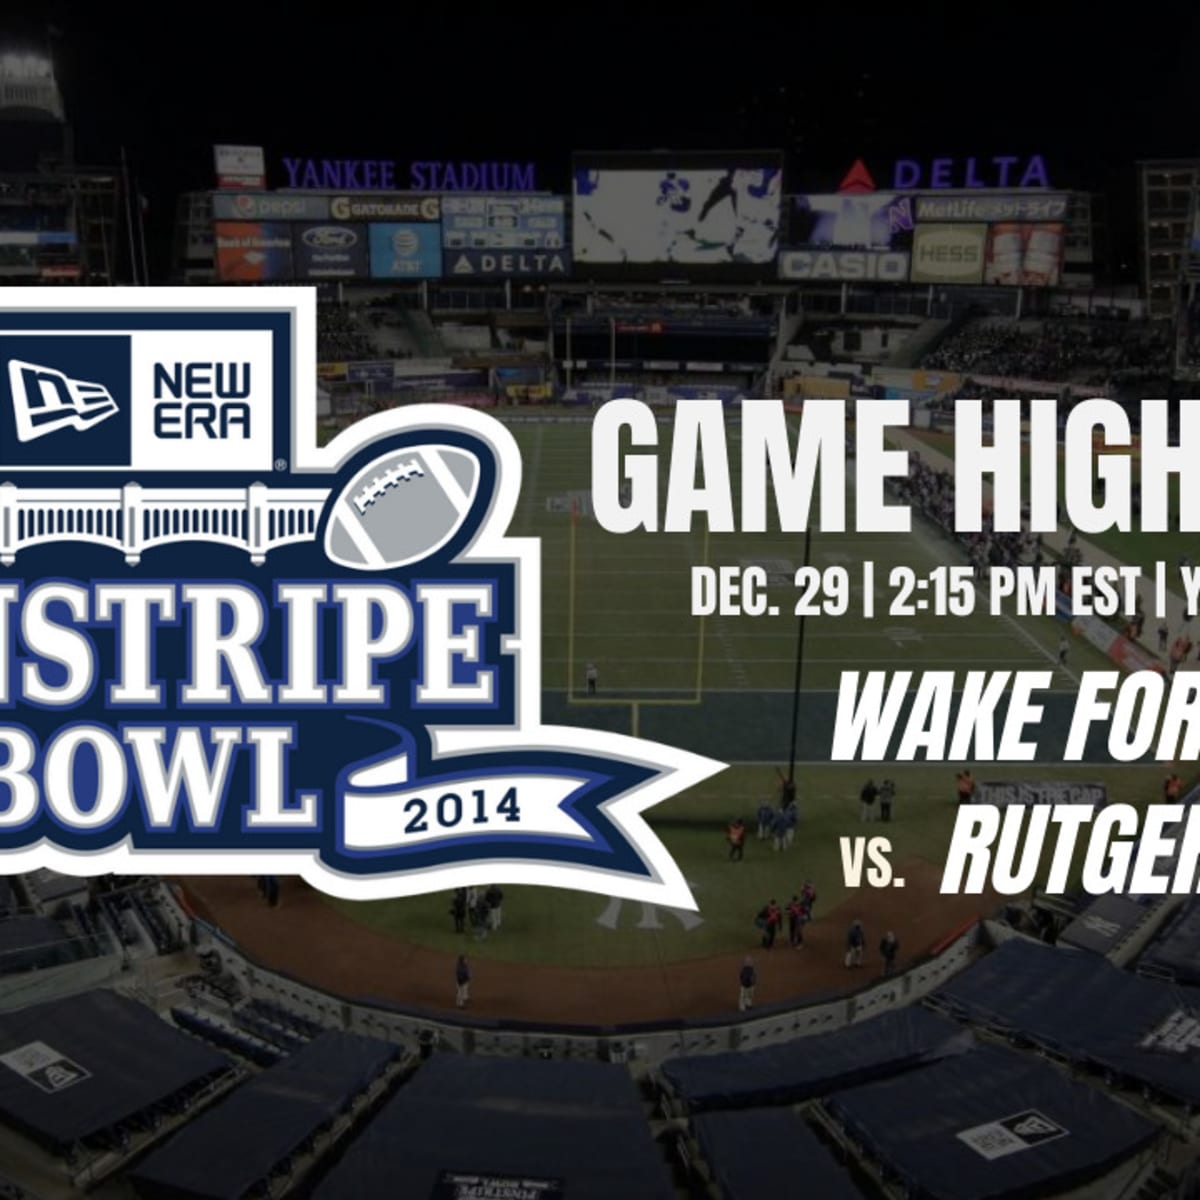 Virginia Tech to honor connection with Yankees on Pinstripe Bowl